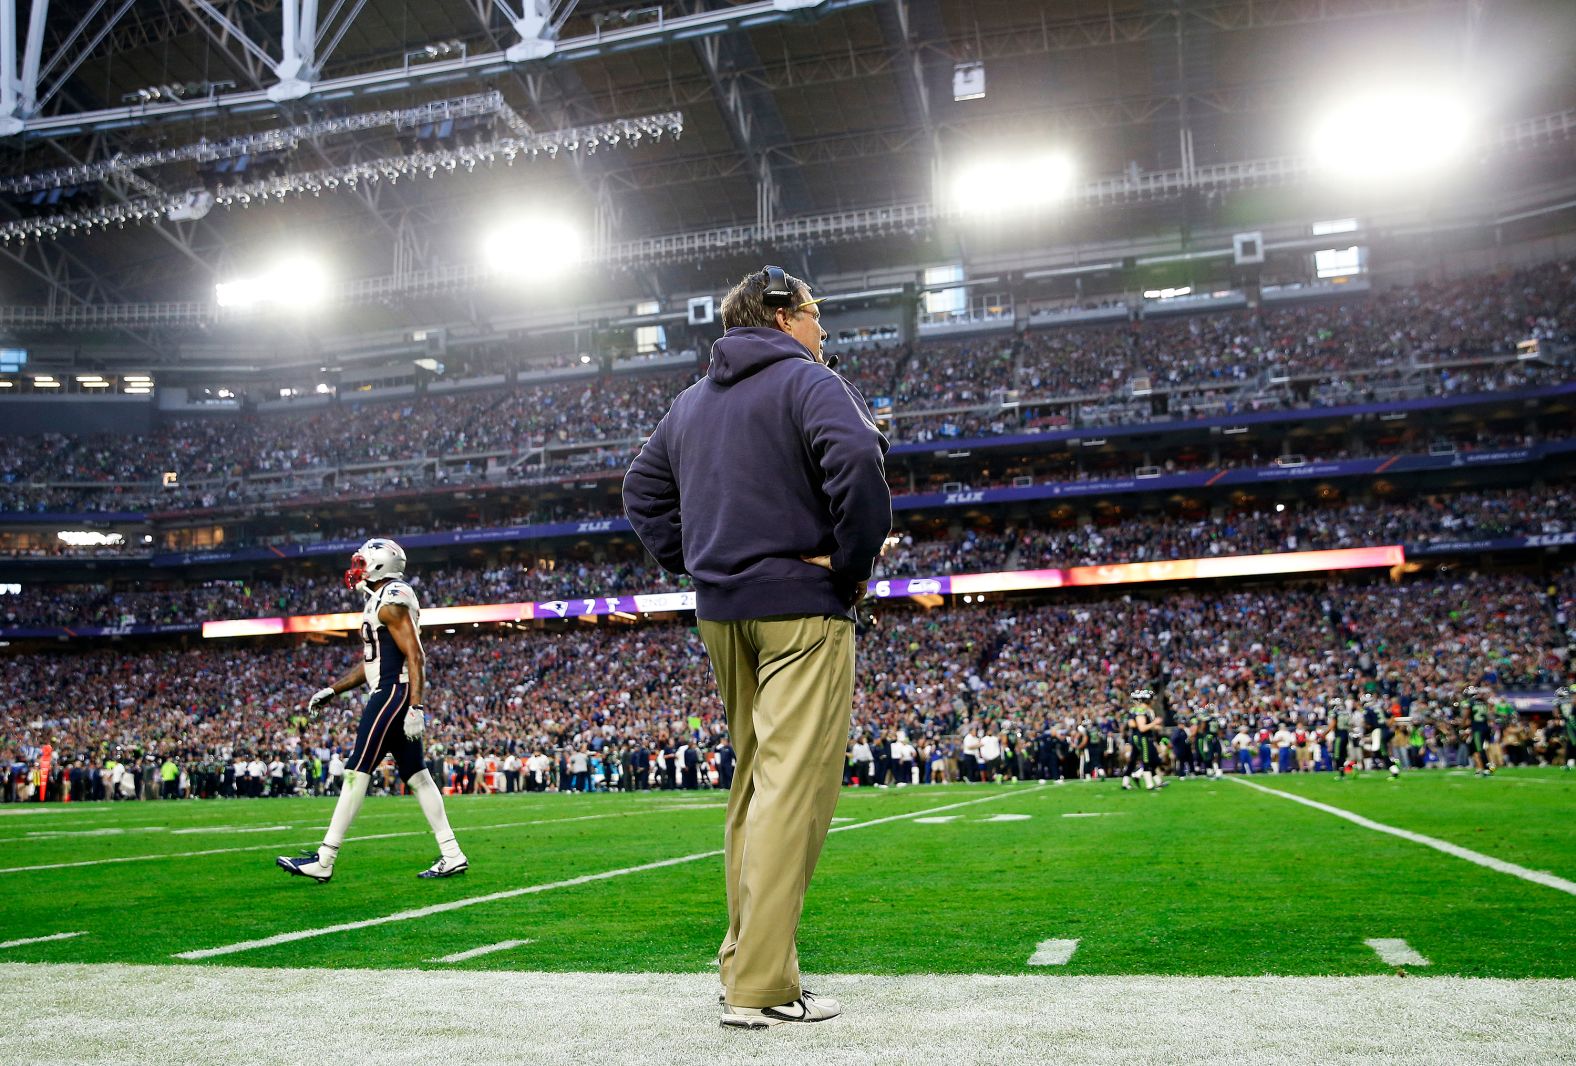 Belichick watches from the sideline as his team plays the Seattle Seahawks in the 2015 Super Bowl.